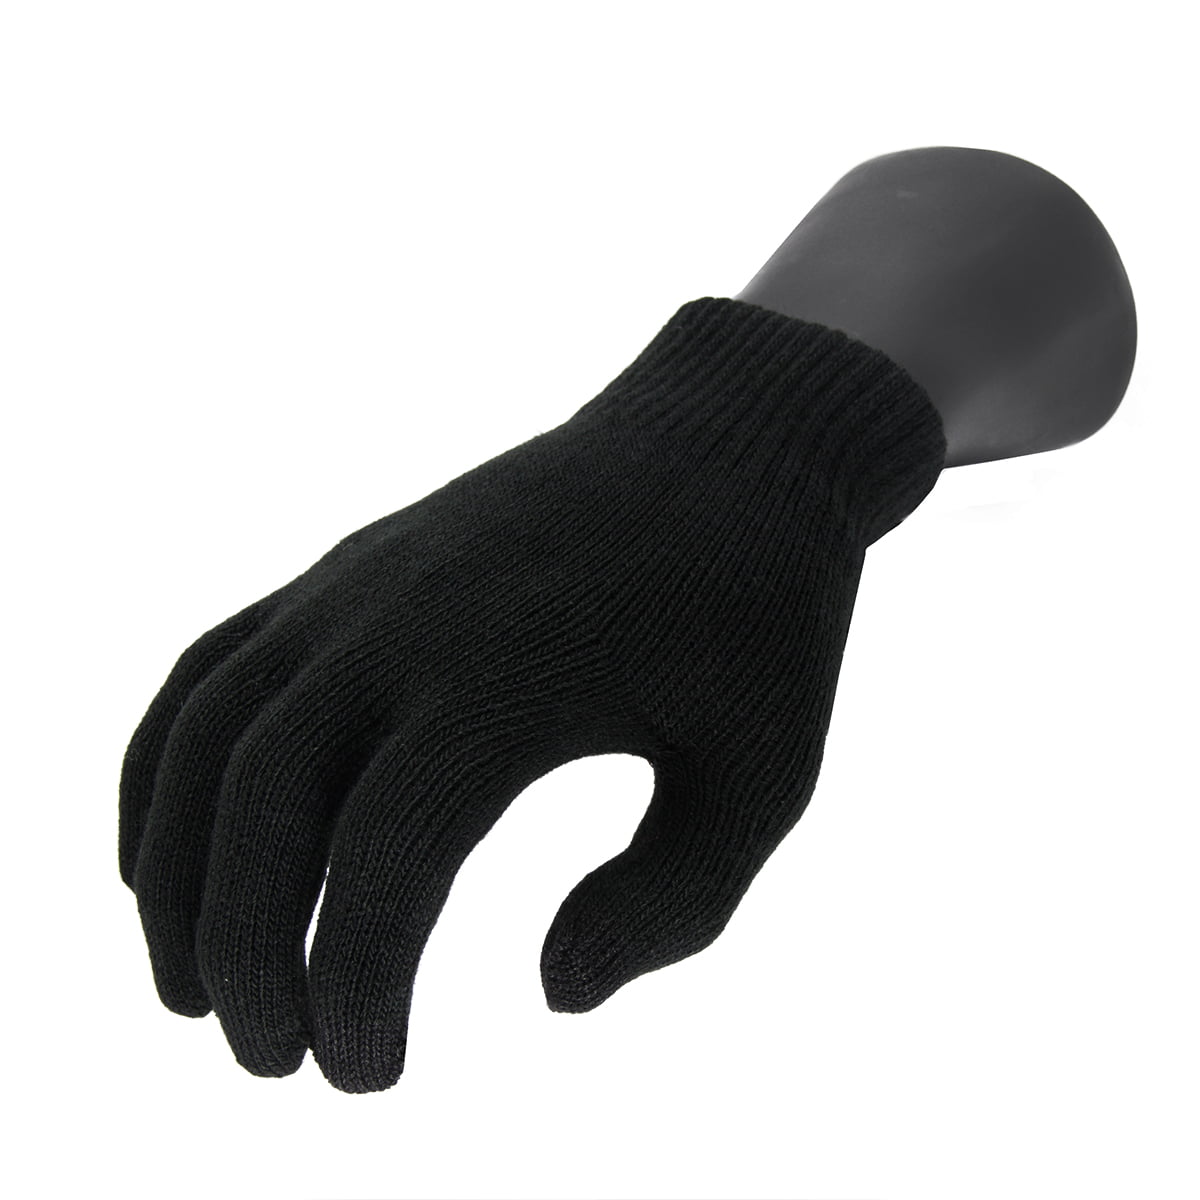 Black Touch Screen Magic Gloves Ladies Mens Kids Unisex Winter Knitted Ipad NEW 